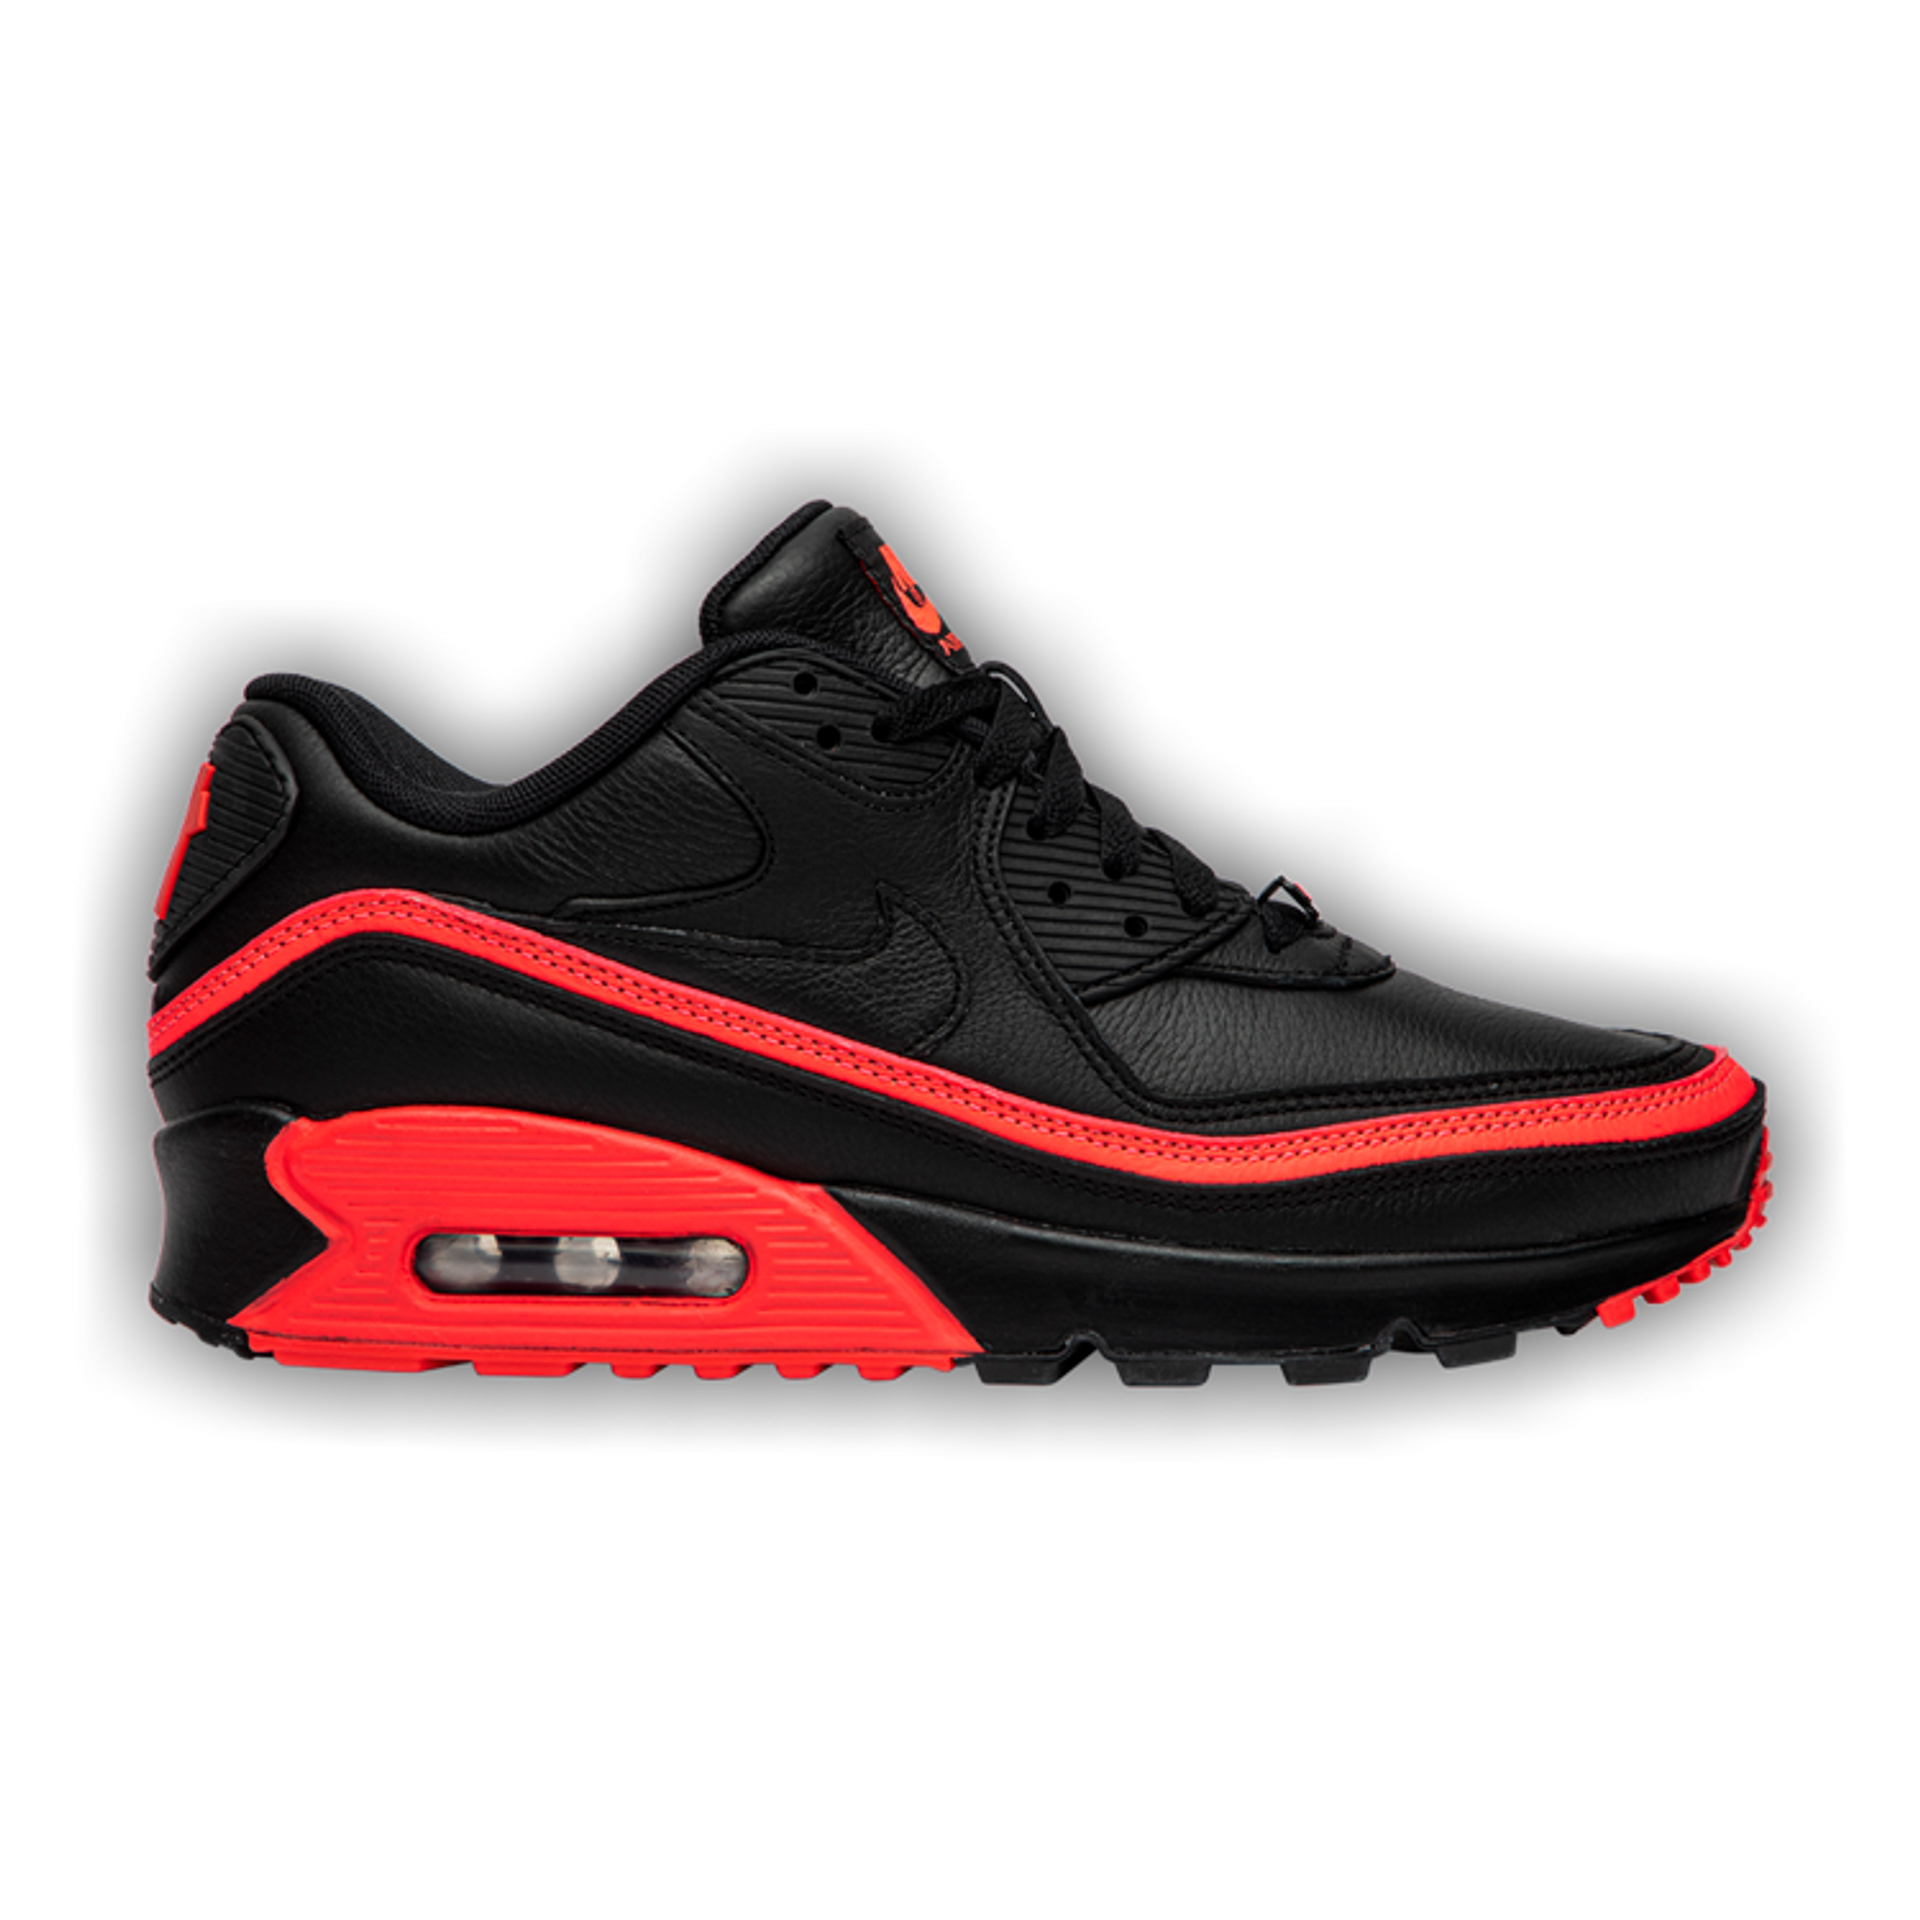 Nike Undefeated x Air Max 90 'Black Solar Red'